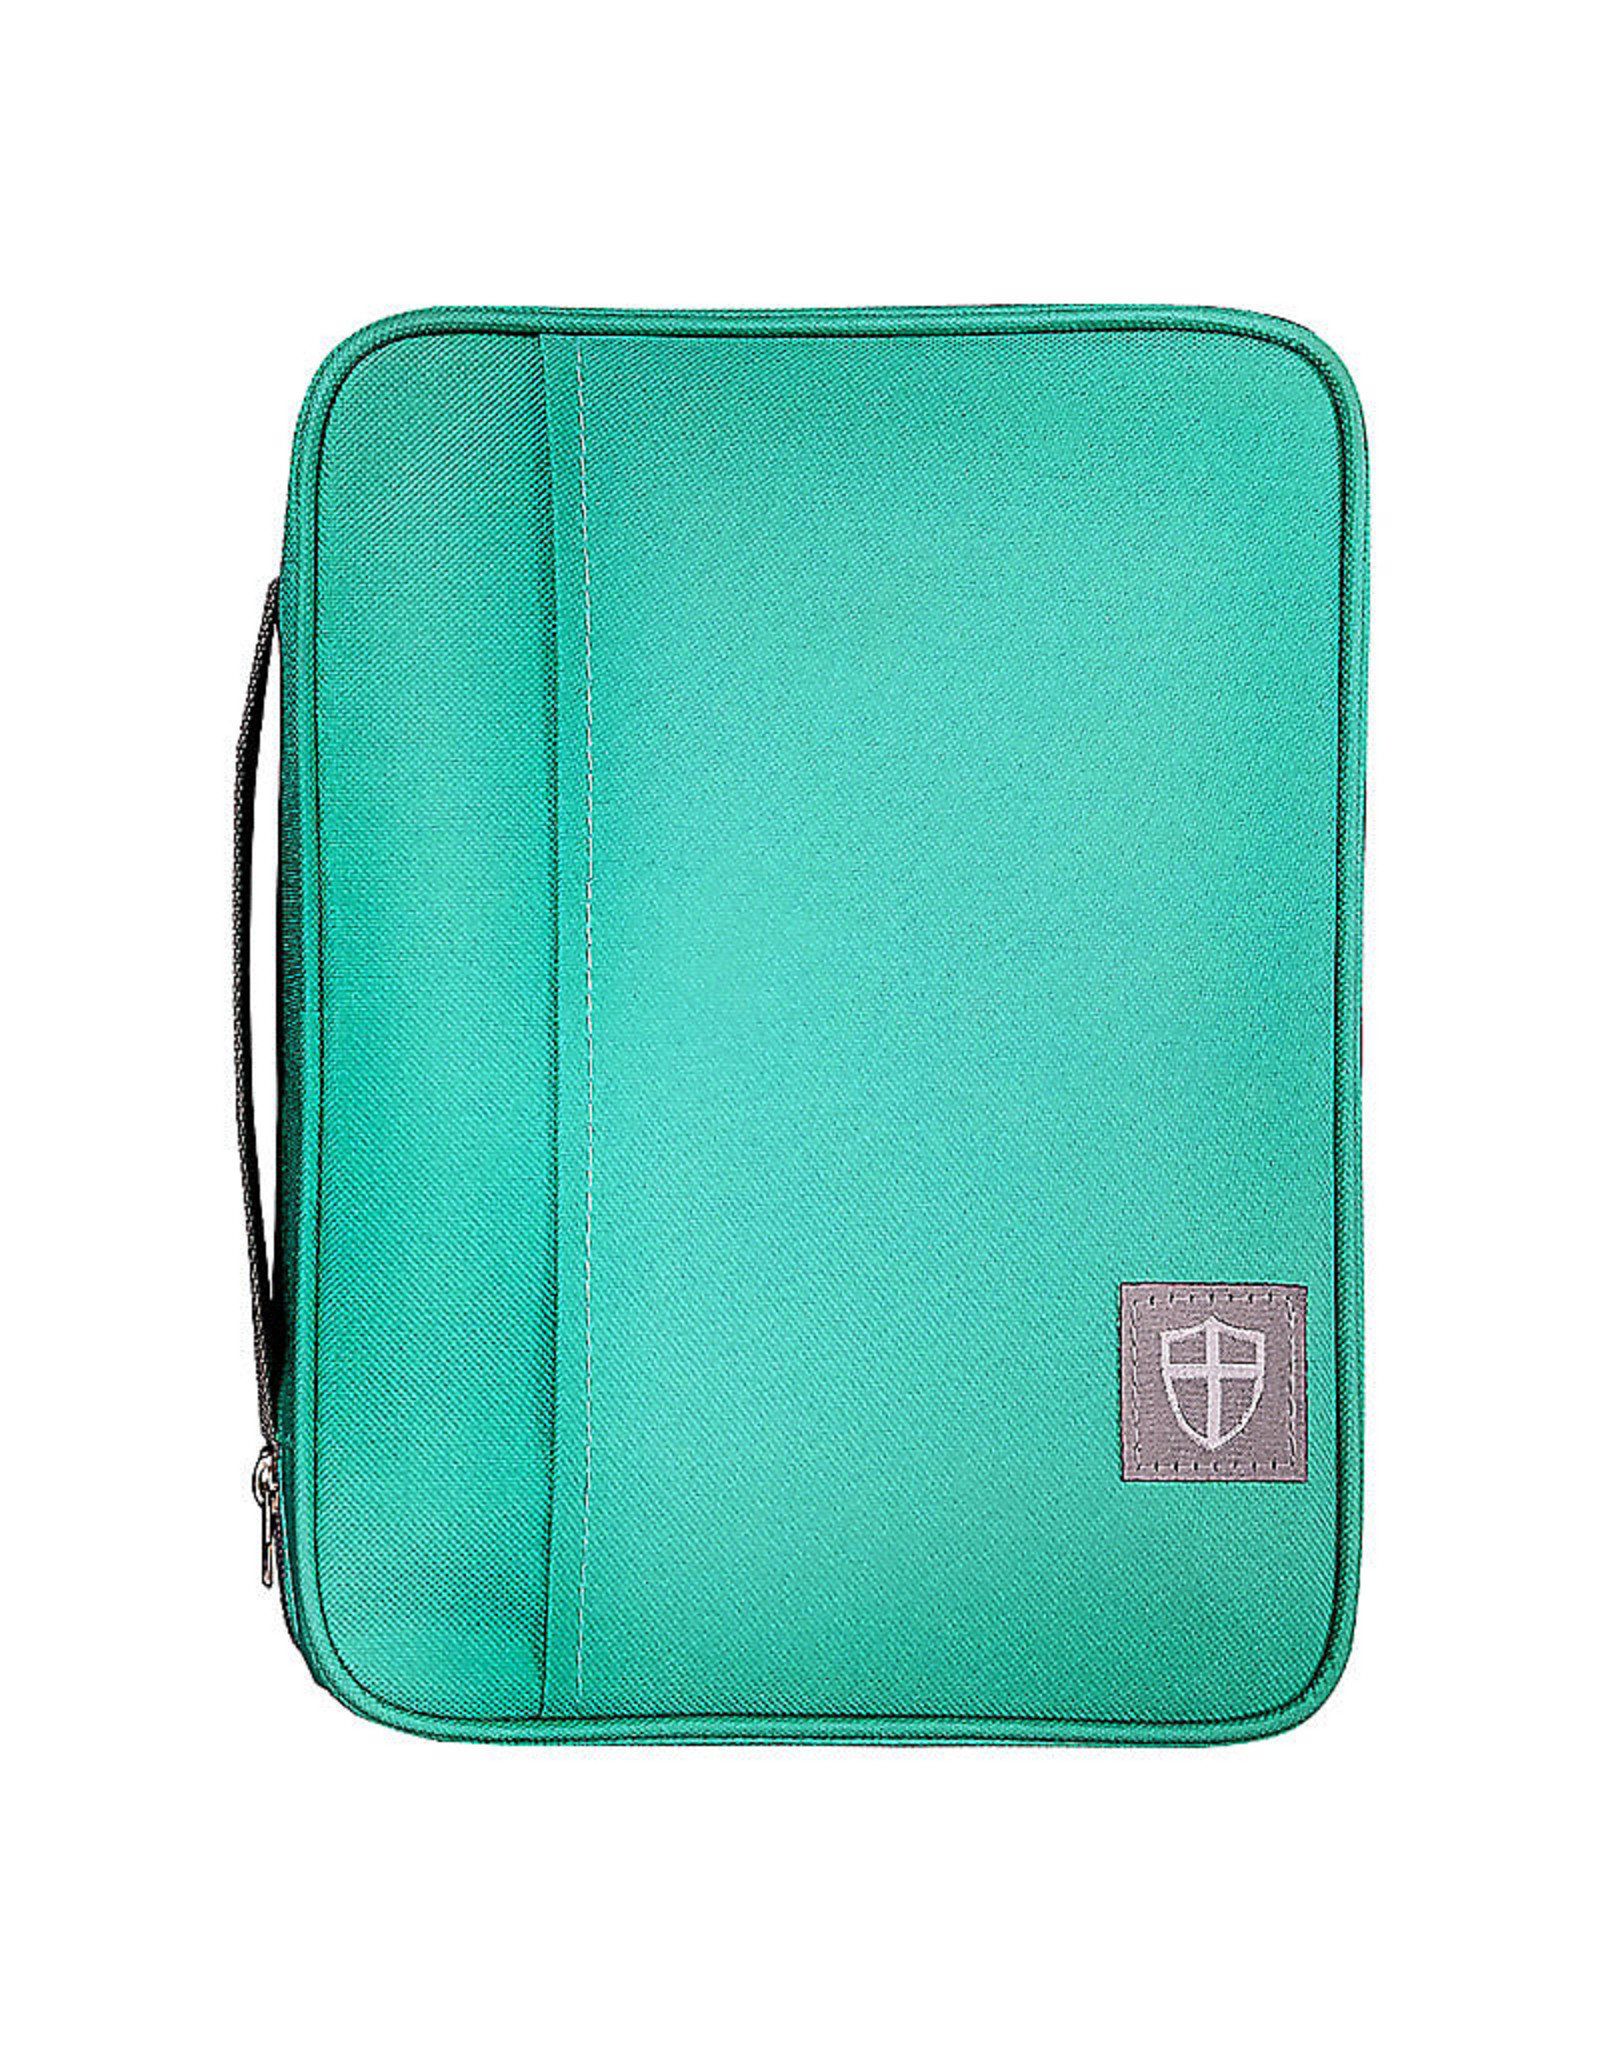 AOG Armor of God Protective Bible Cover (L)- Tiffany Blue